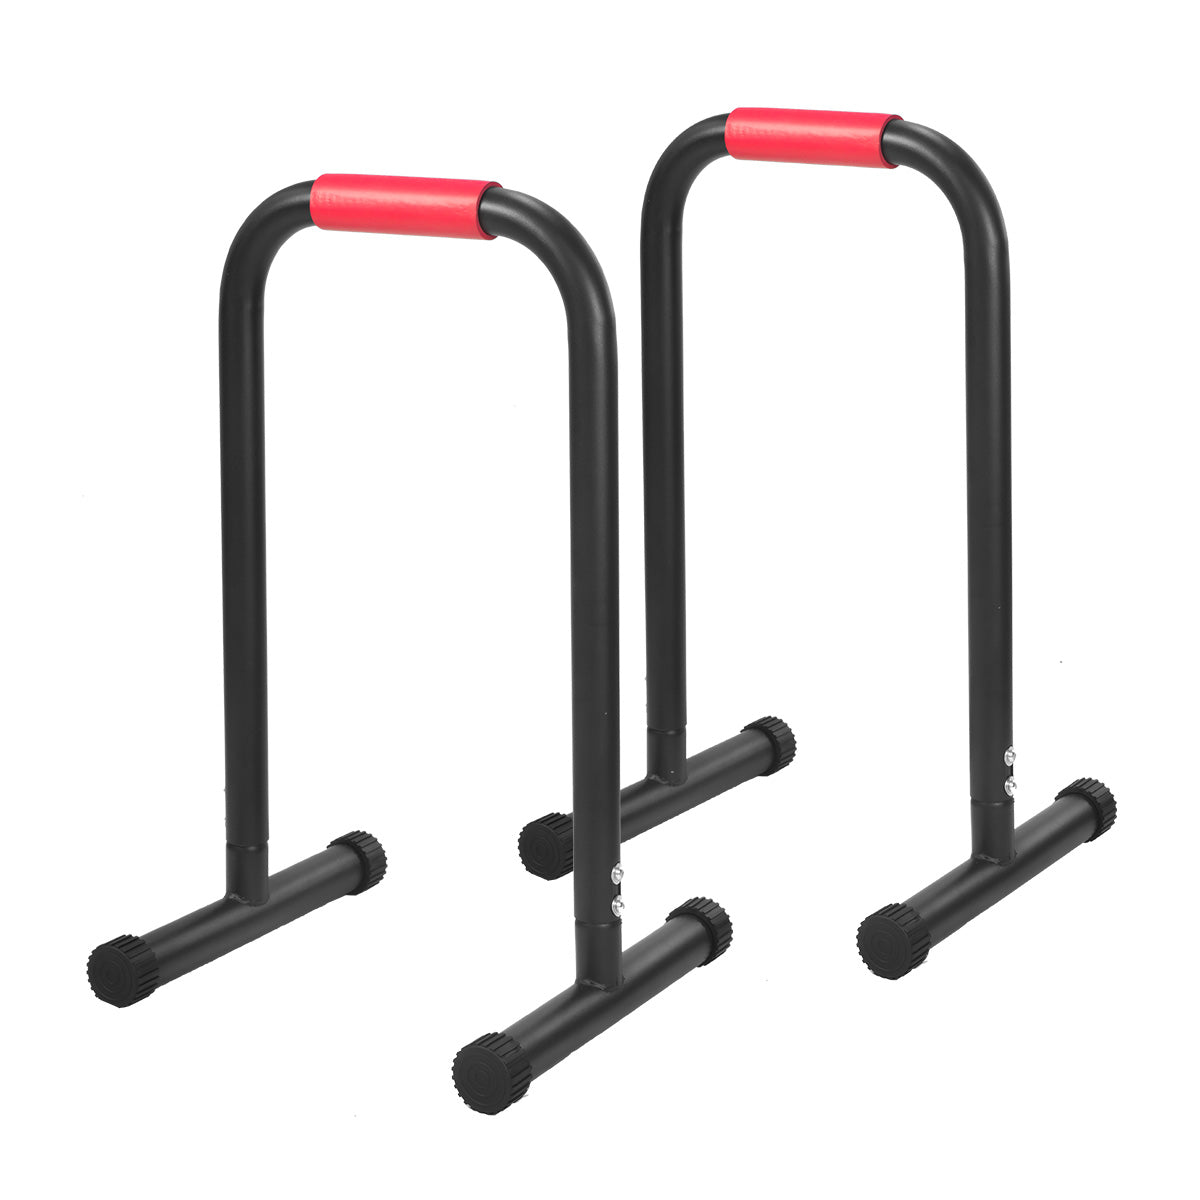 Powertrain Pair Dip Bar Parallette Stand Workout Exercise Gym Station